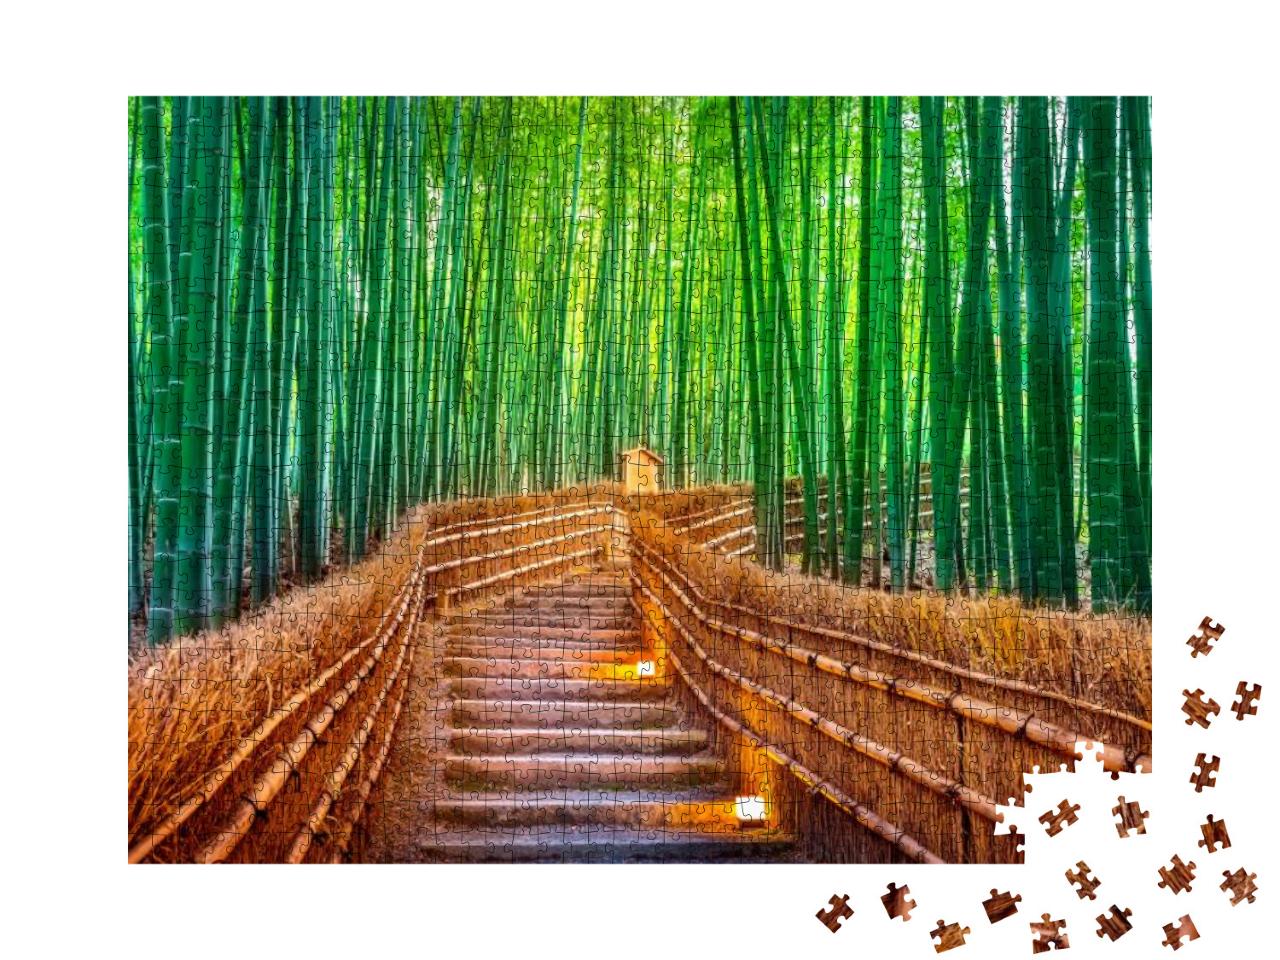 Bamboo Forest in Kyoto, Japan... Jigsaw Puzzle with 1000 pieces